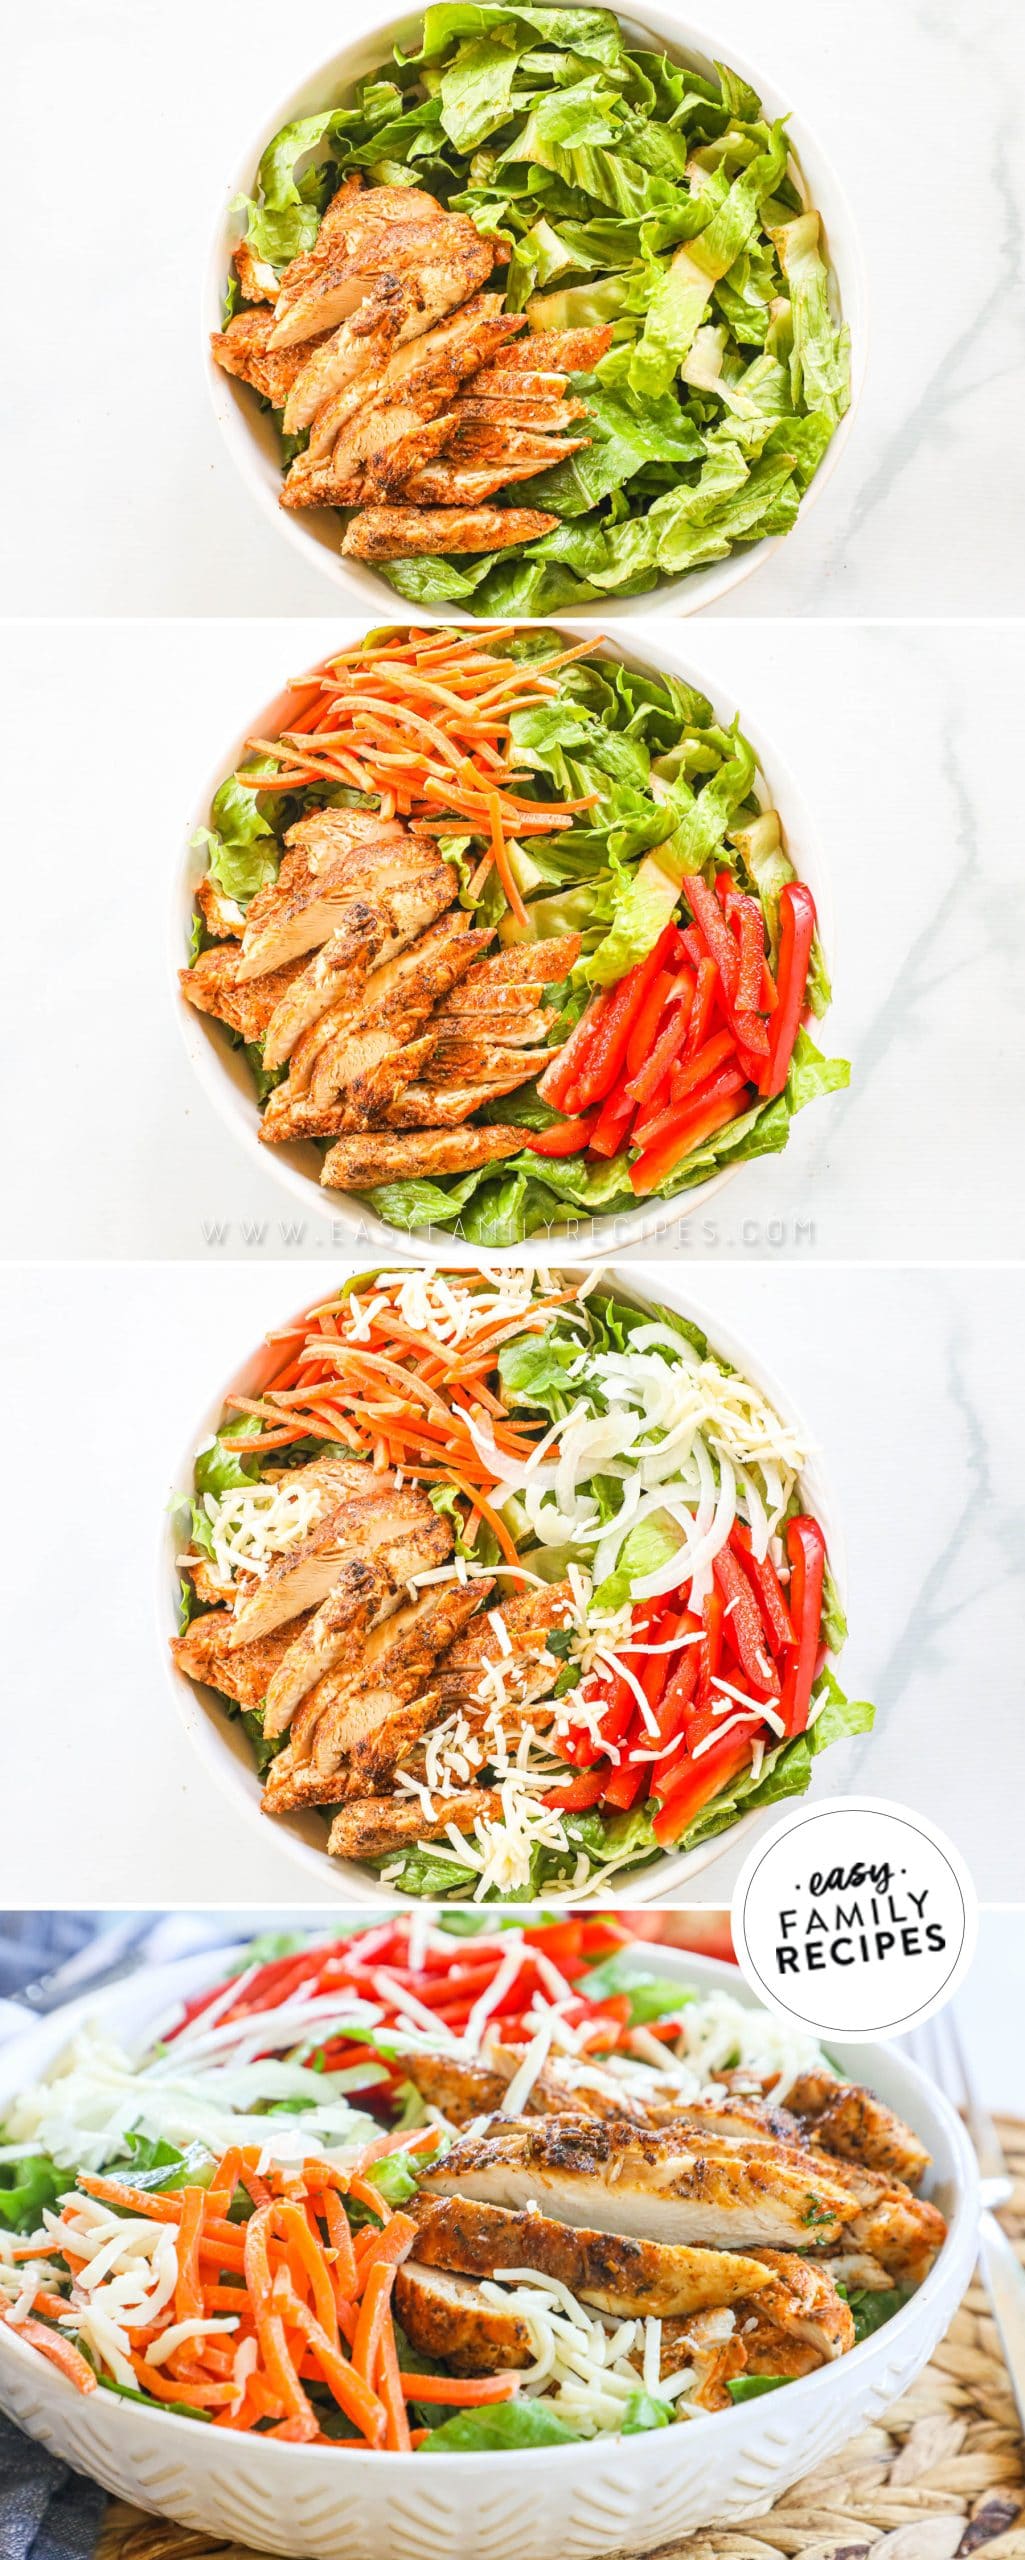 How to make blackened chicken salad 1. start with chopped romaine lettuce. 2. Add sliced blackened chicken and sliced bell pepper. 3. Top with sliced onion, and shredded cheese. Toss with creamy dressing.